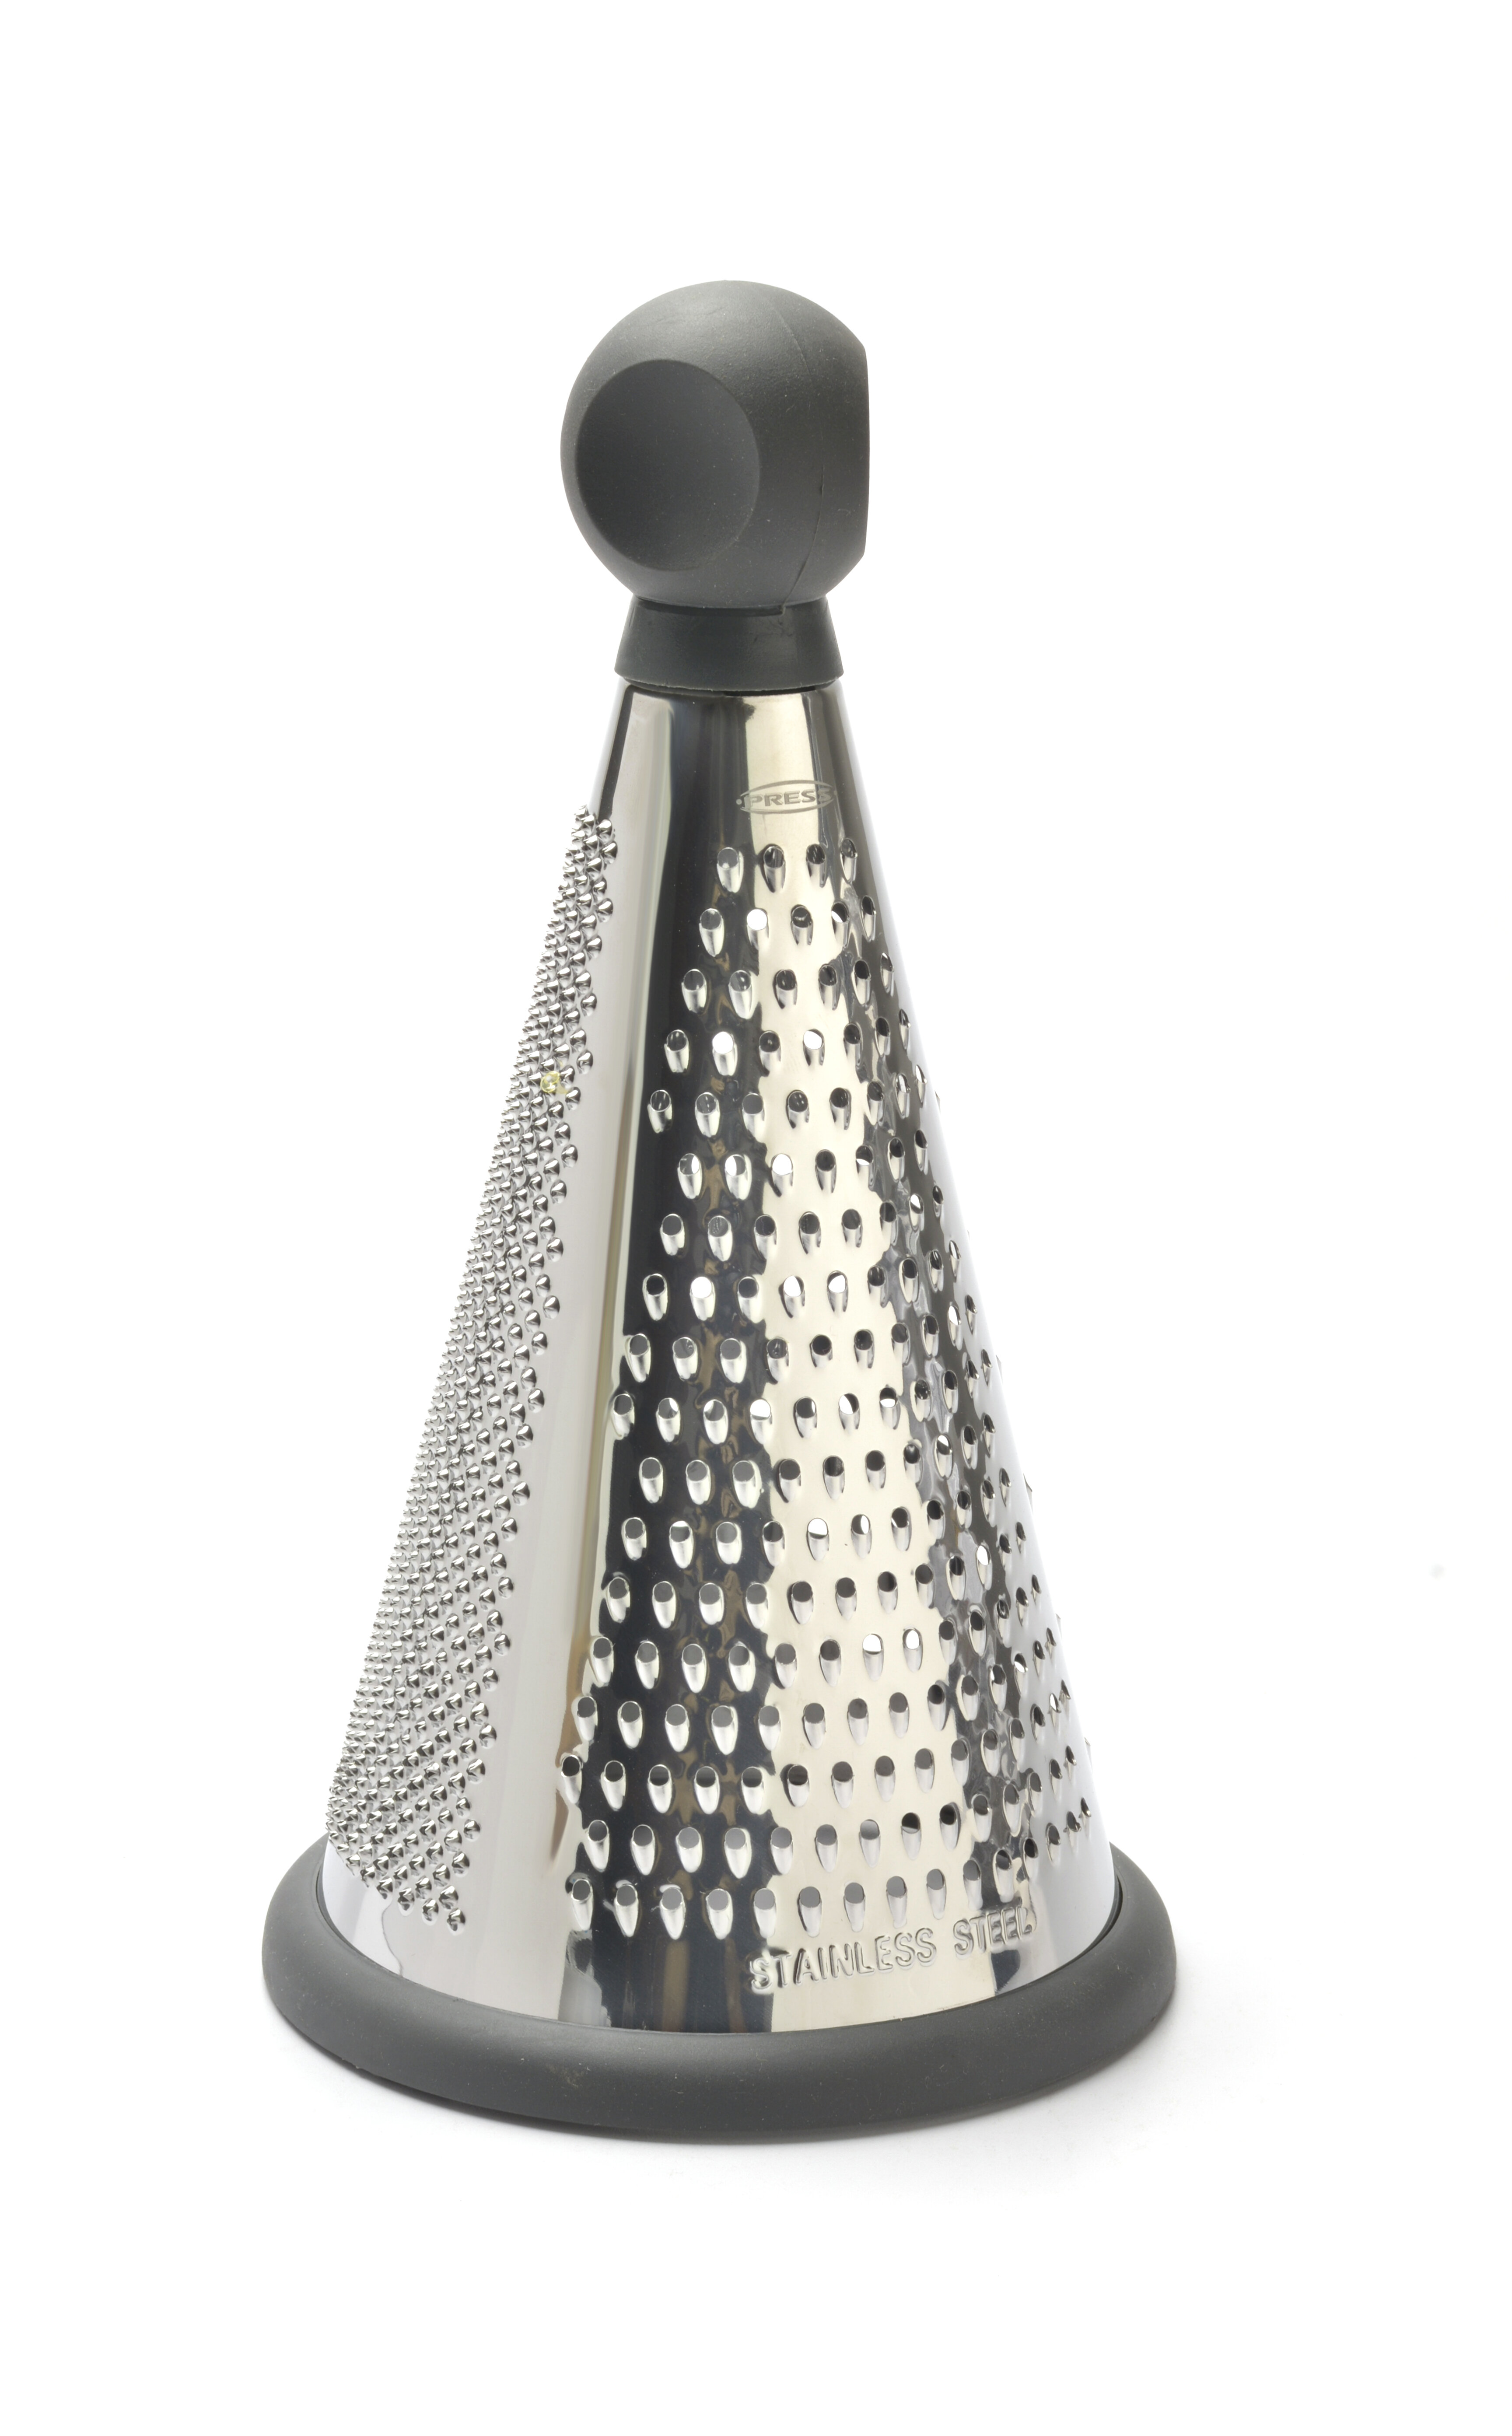 Press Grater 3-Sided Stainless-Steel, Ideal for Grating Cheese or Vegetables, Non-Slip Rubber. Premium Line.